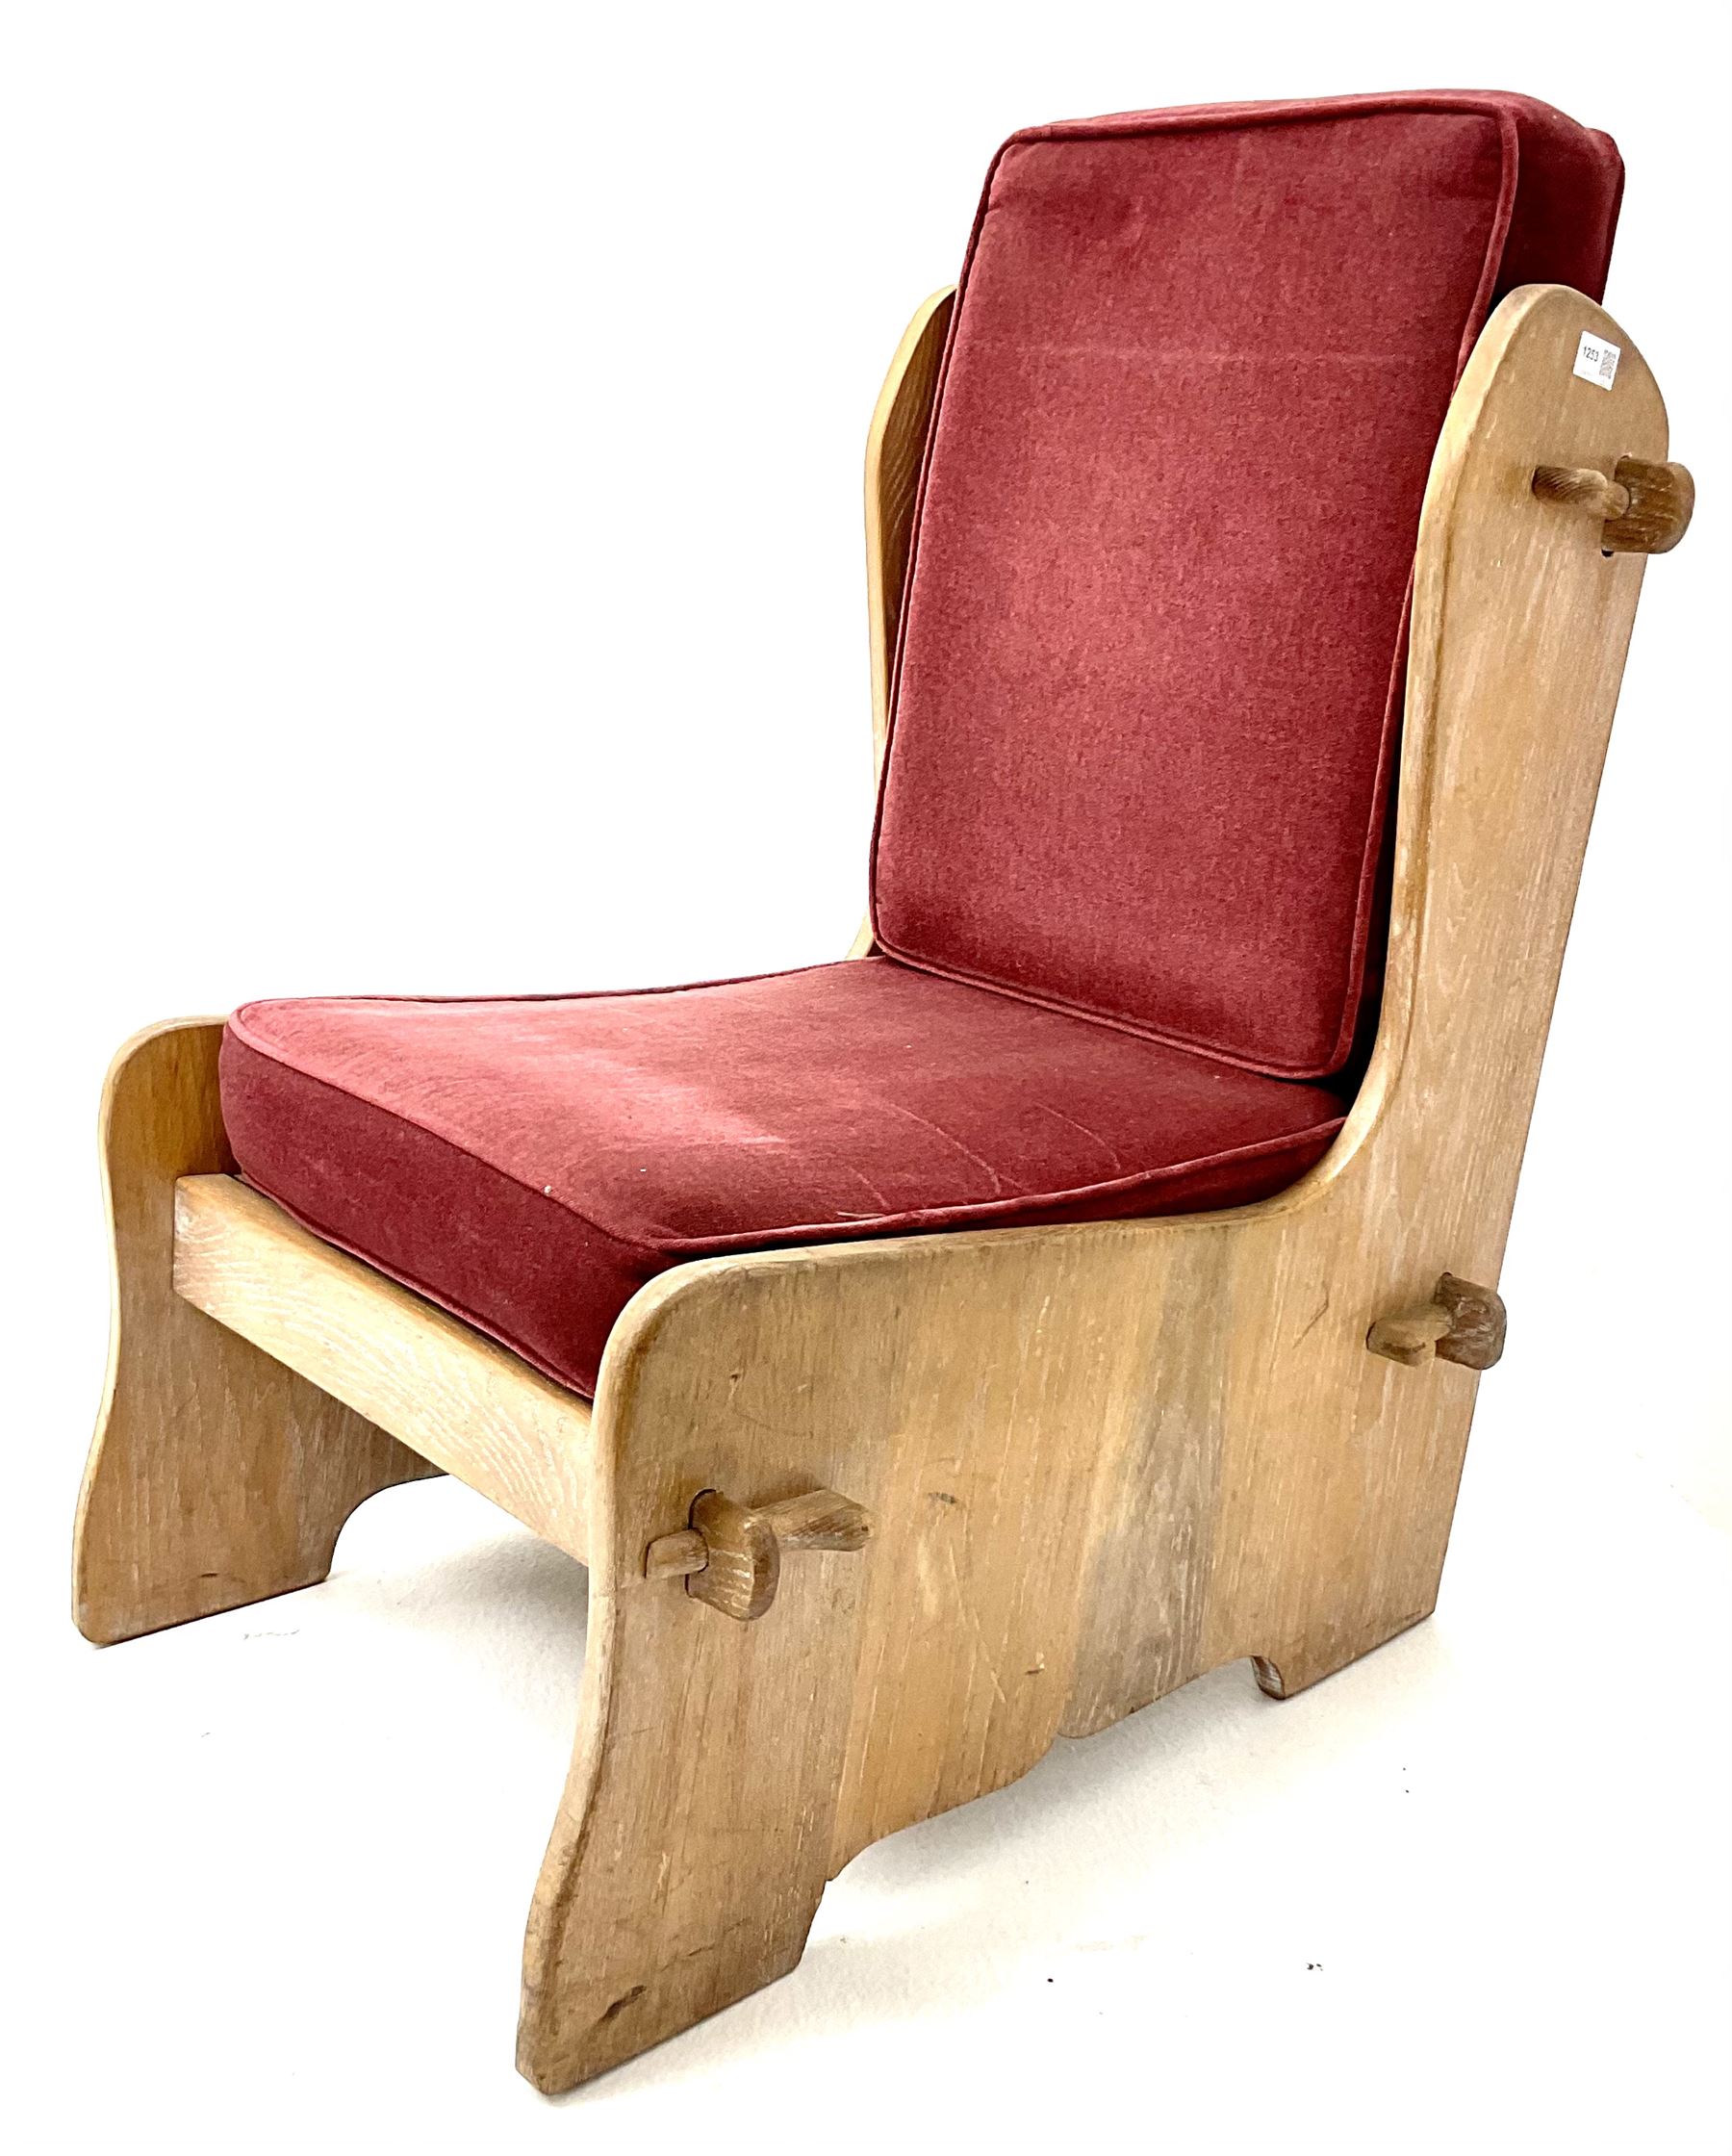 20th century oak chair - Image 2 of 2